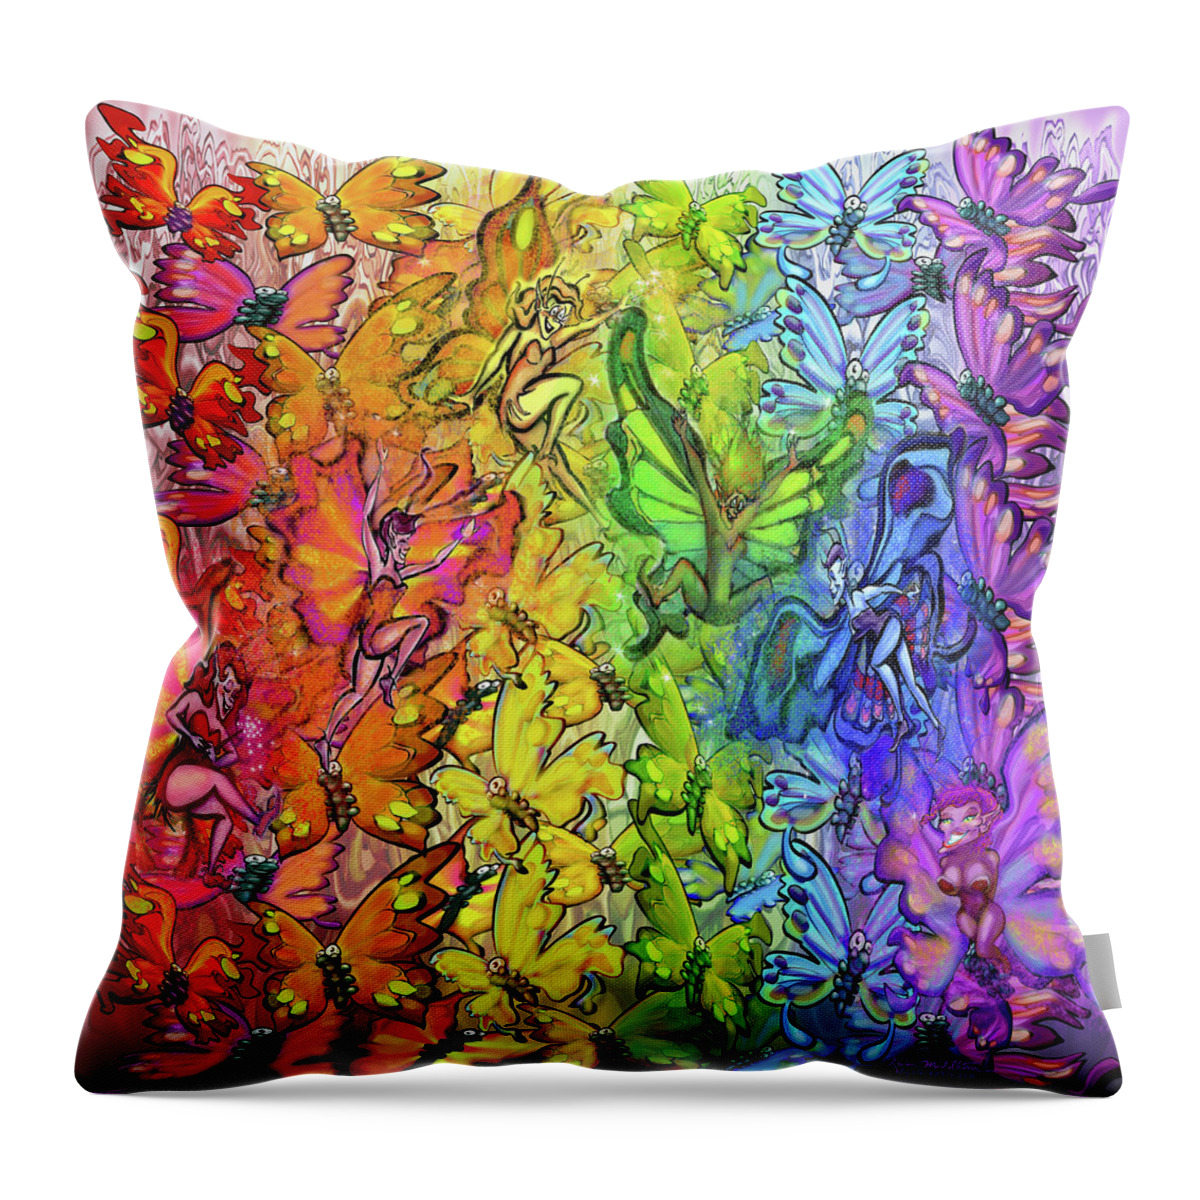 Butterfly Throw Pillow featuring the digital art Butterflies Faeries Rainbow by Kevin Middleton